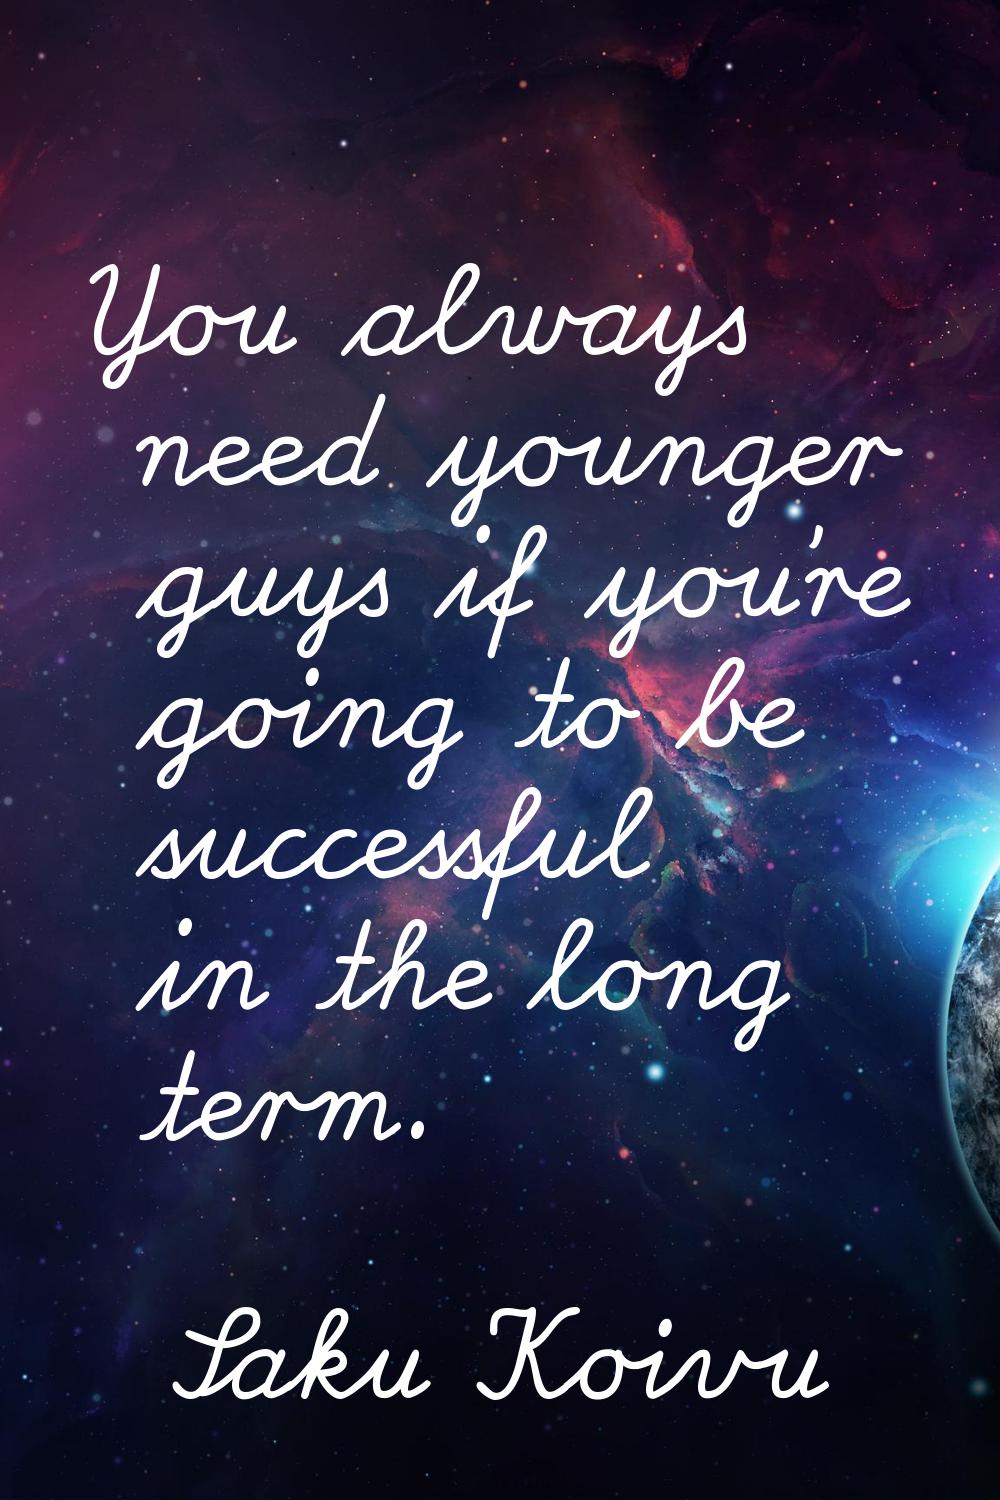 You always need younger guys if you're going to be successful in the long term.